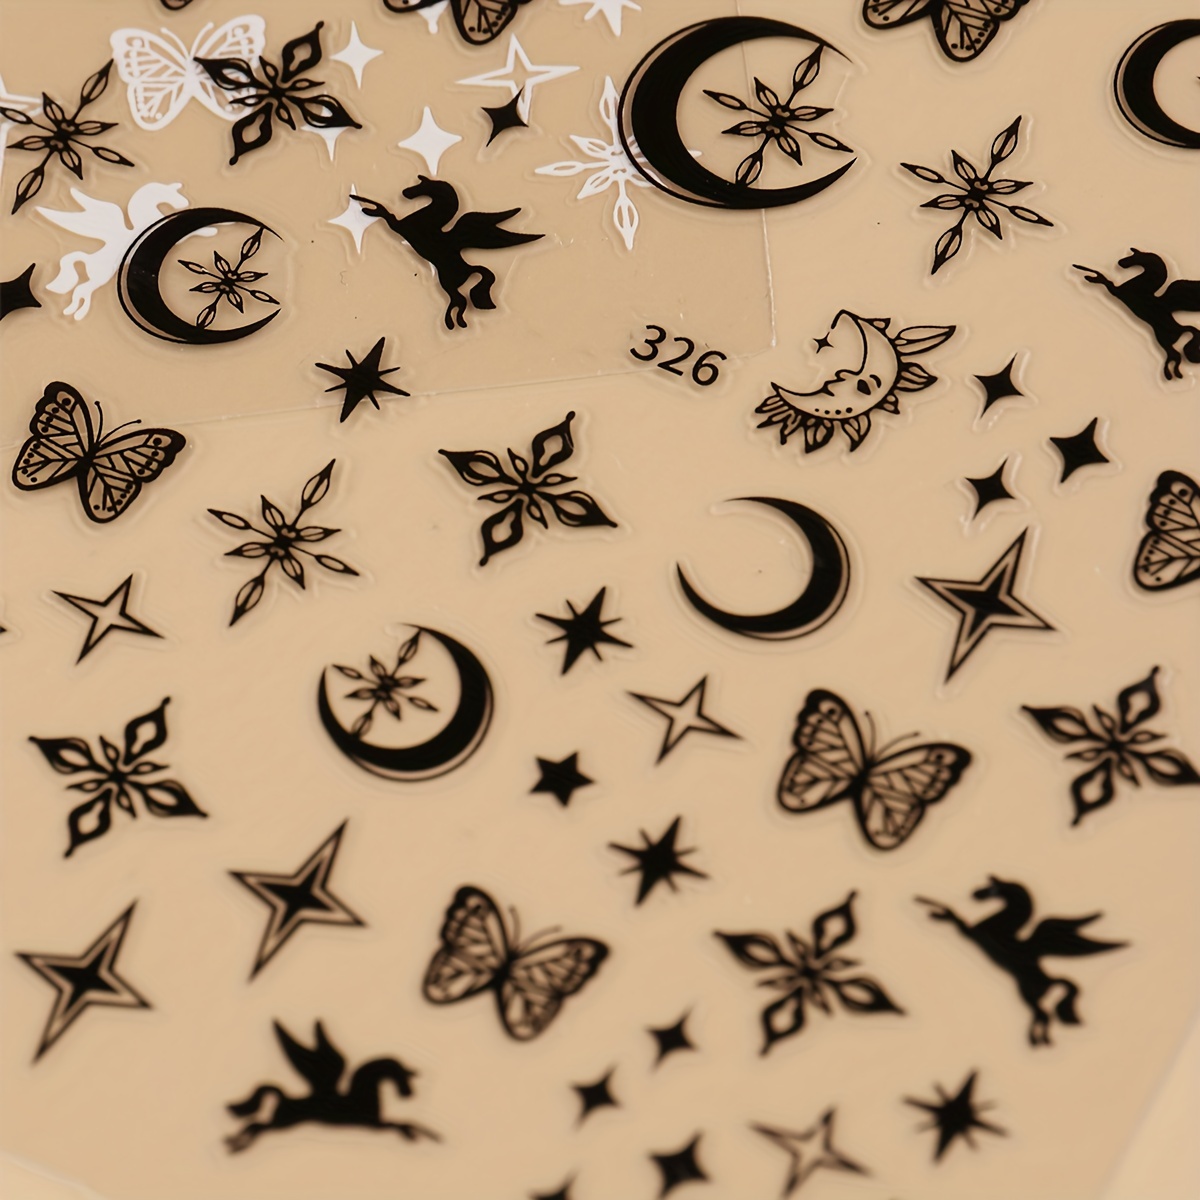 Purple Butterfly 3D Nail Art Sticker Spring Flowers Stars Moon Design  Adhesive Transfer Sliders Charms Manicures Decor LETB-151